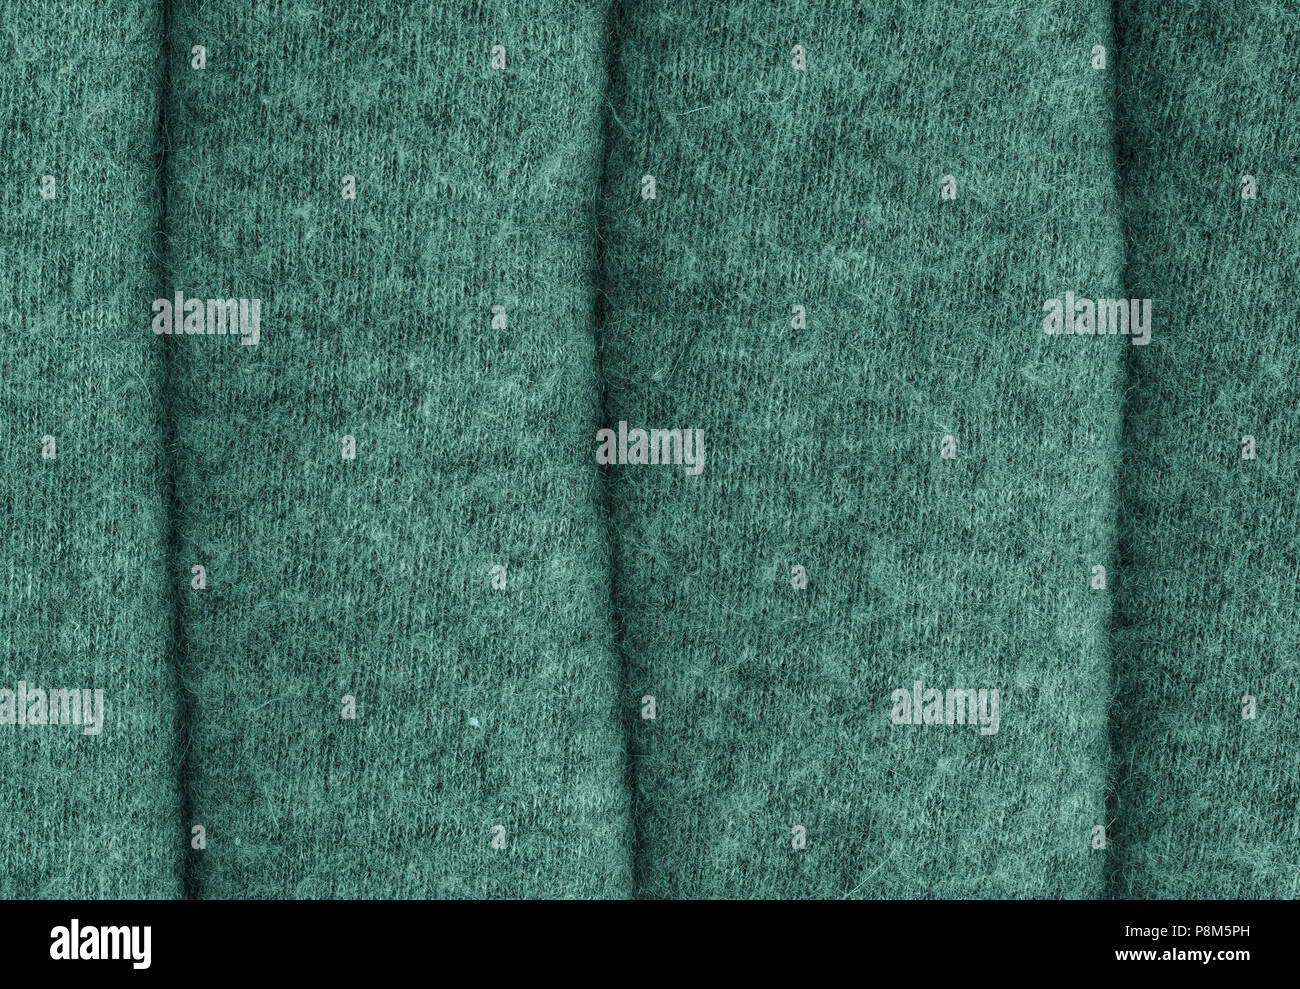 Quilted jersey fabric texture Stock Photo - Alamy